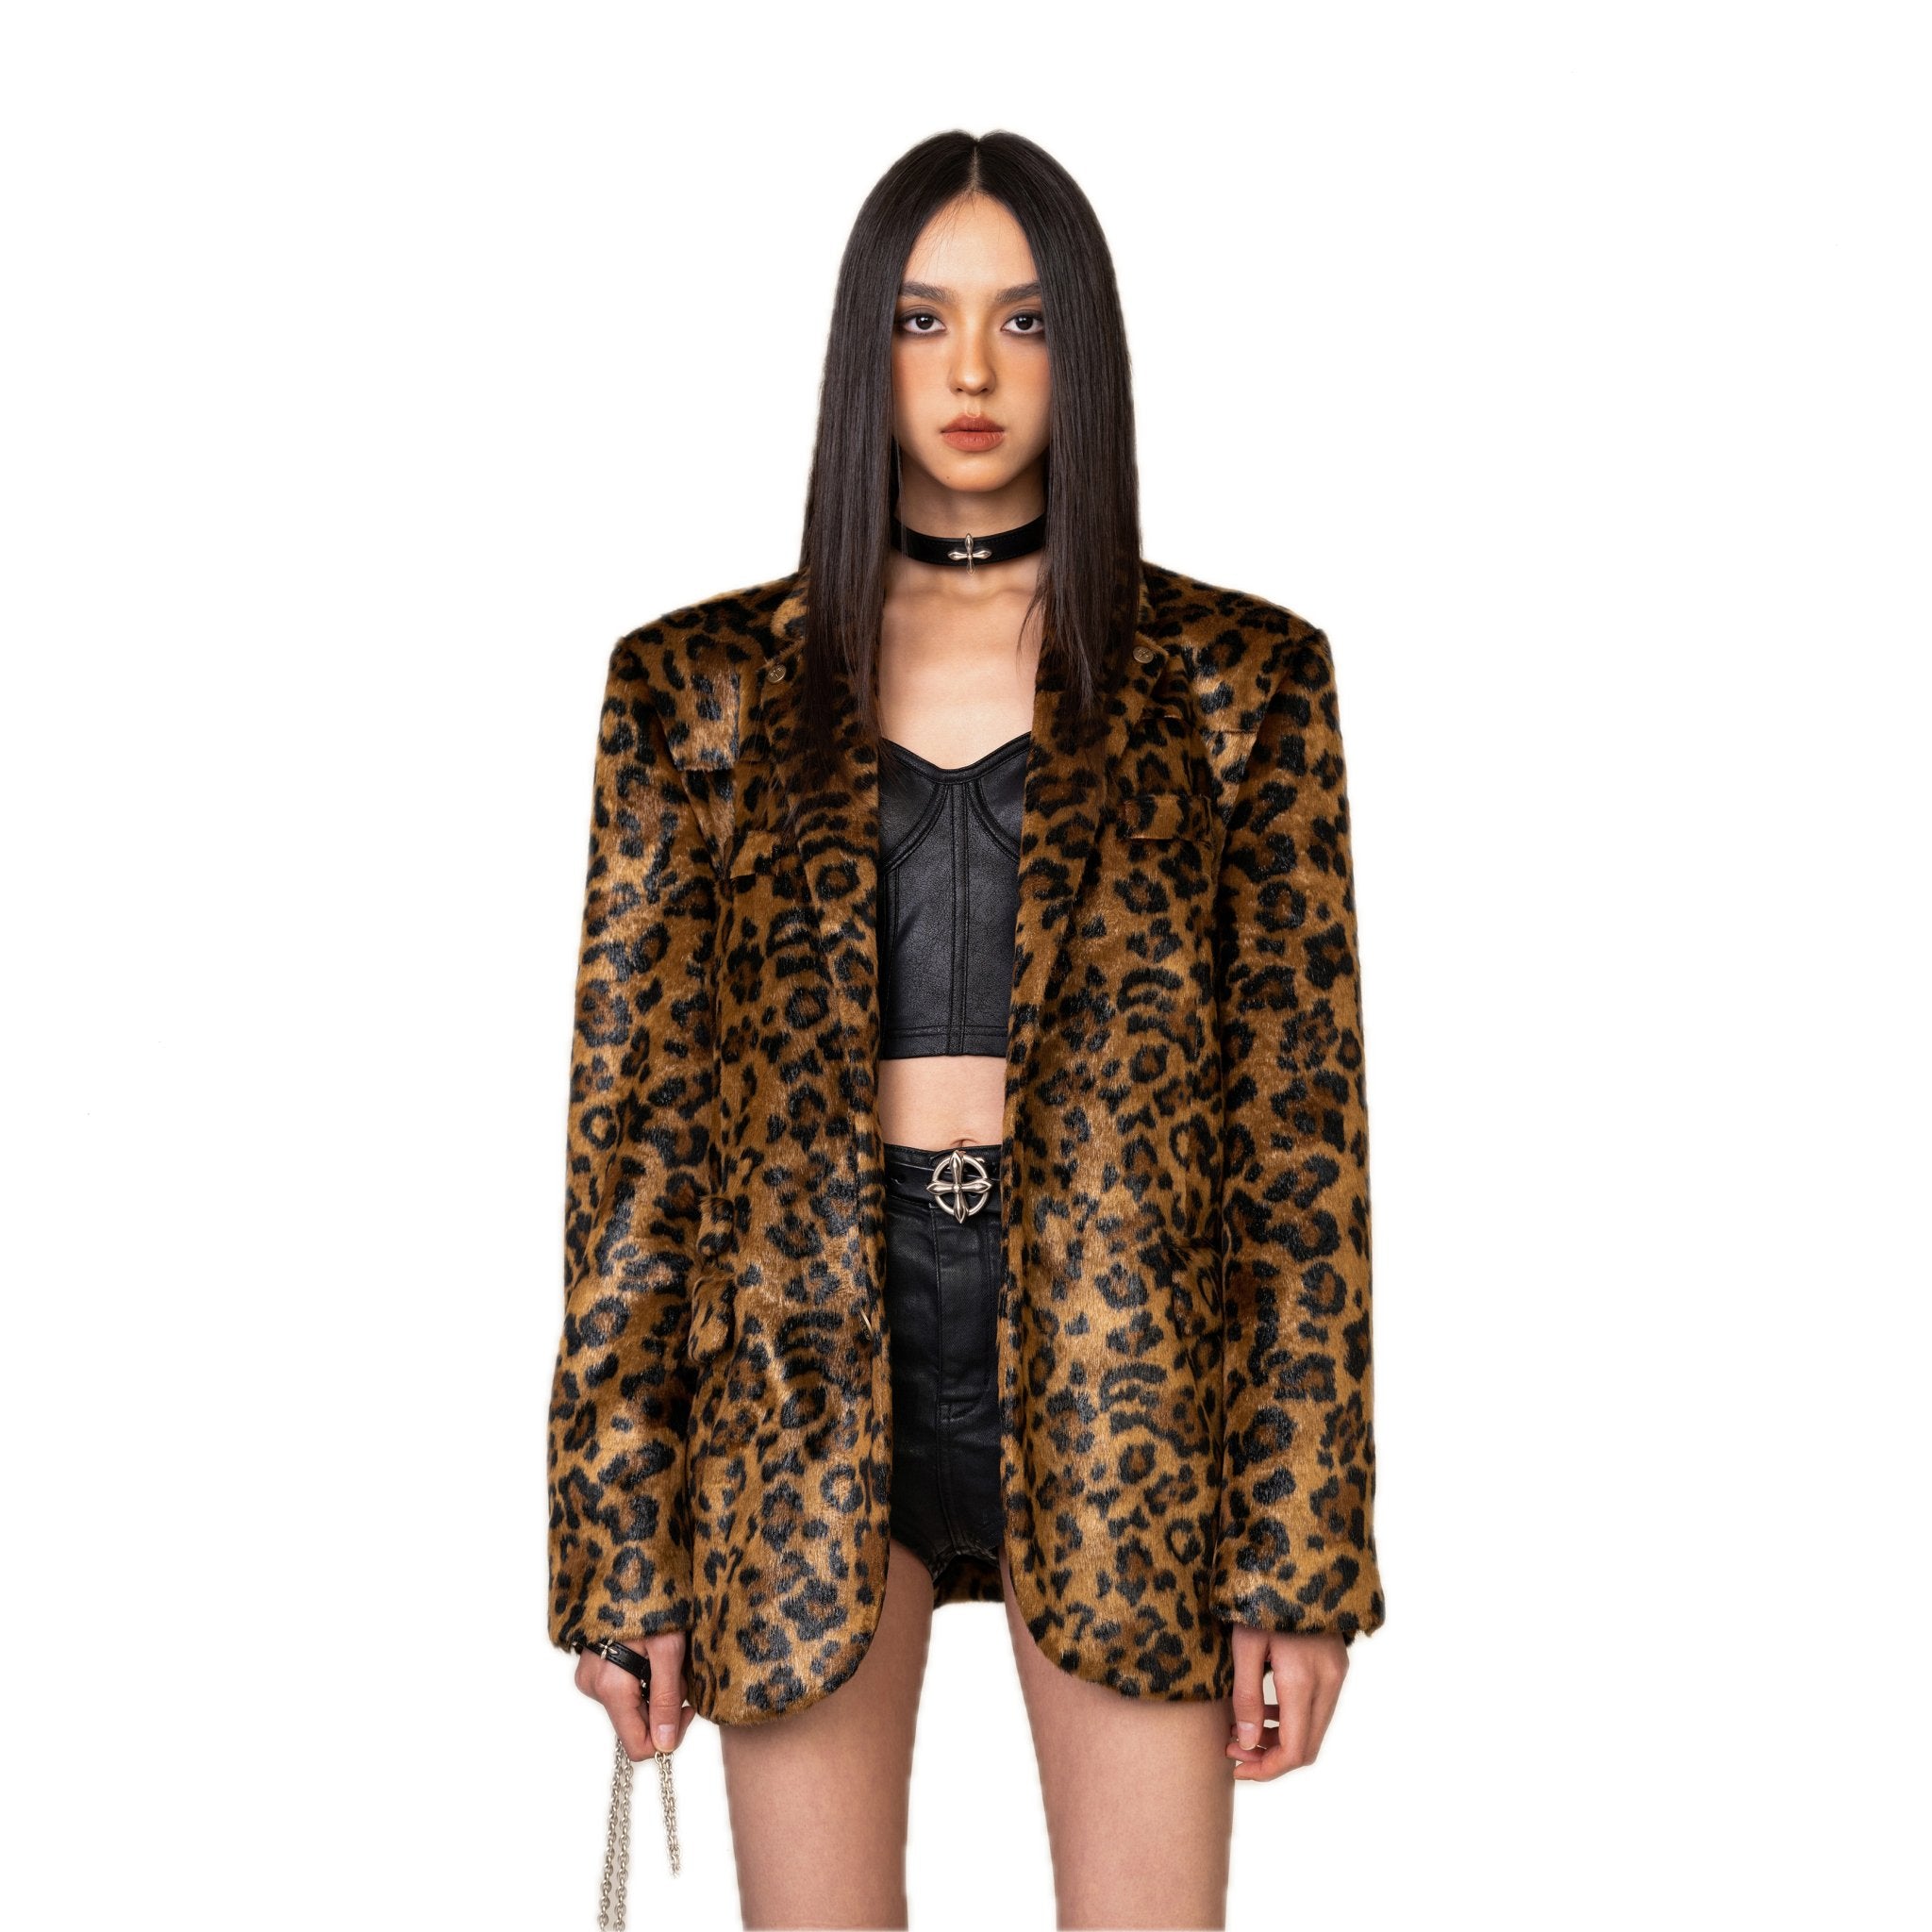 SMFK WildWorld Leopard Faux Fur Suit | MADA IN CHINA